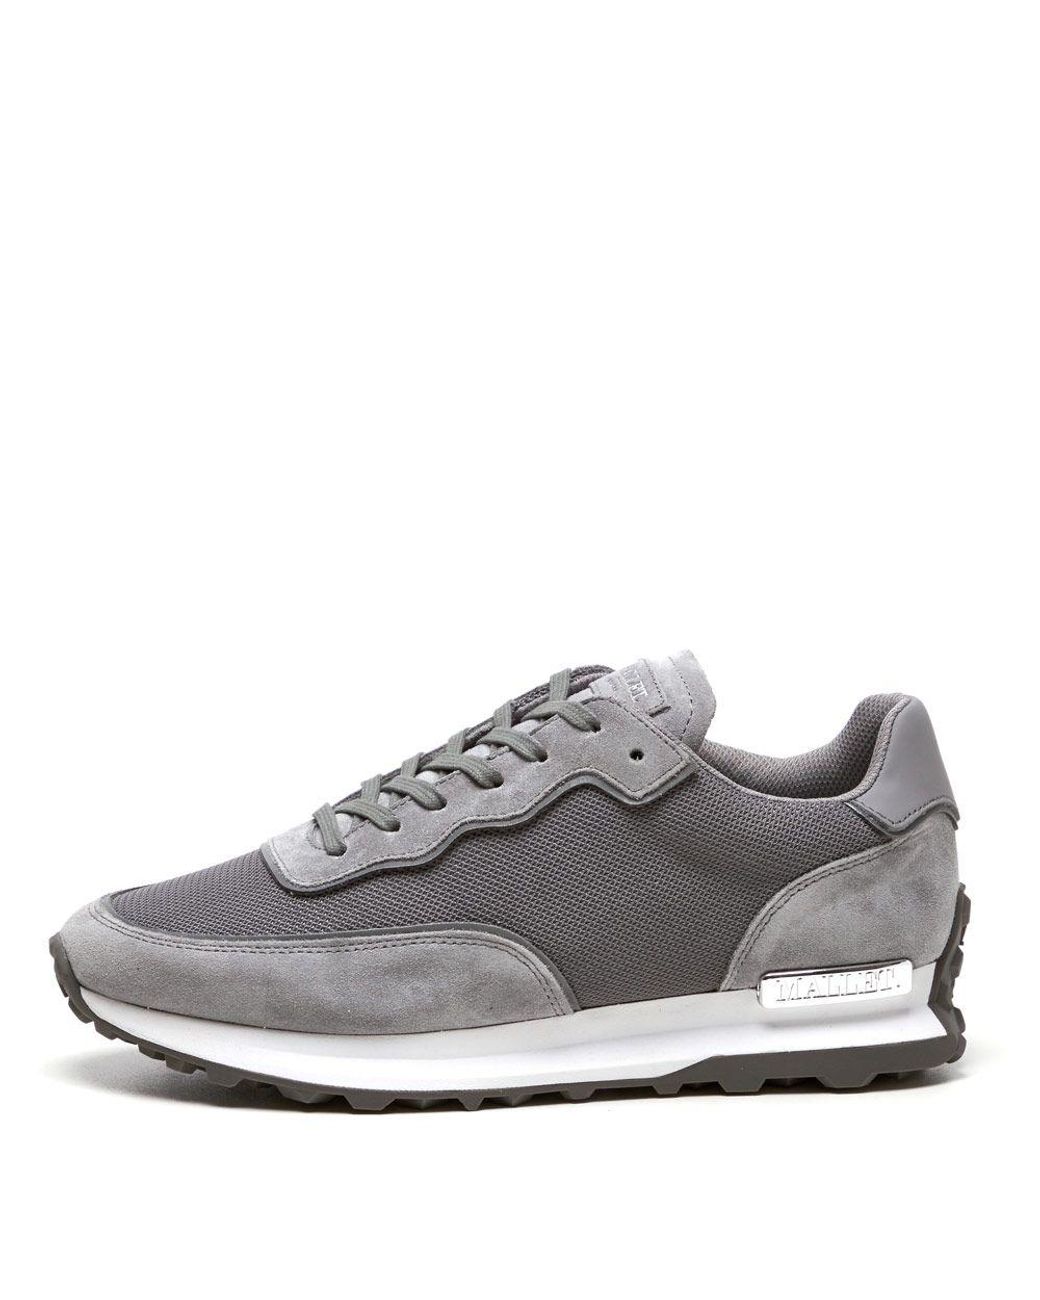 Mallet Suede Caledonian Reflective Mesh Trainers - Grey in Gray for Men ...